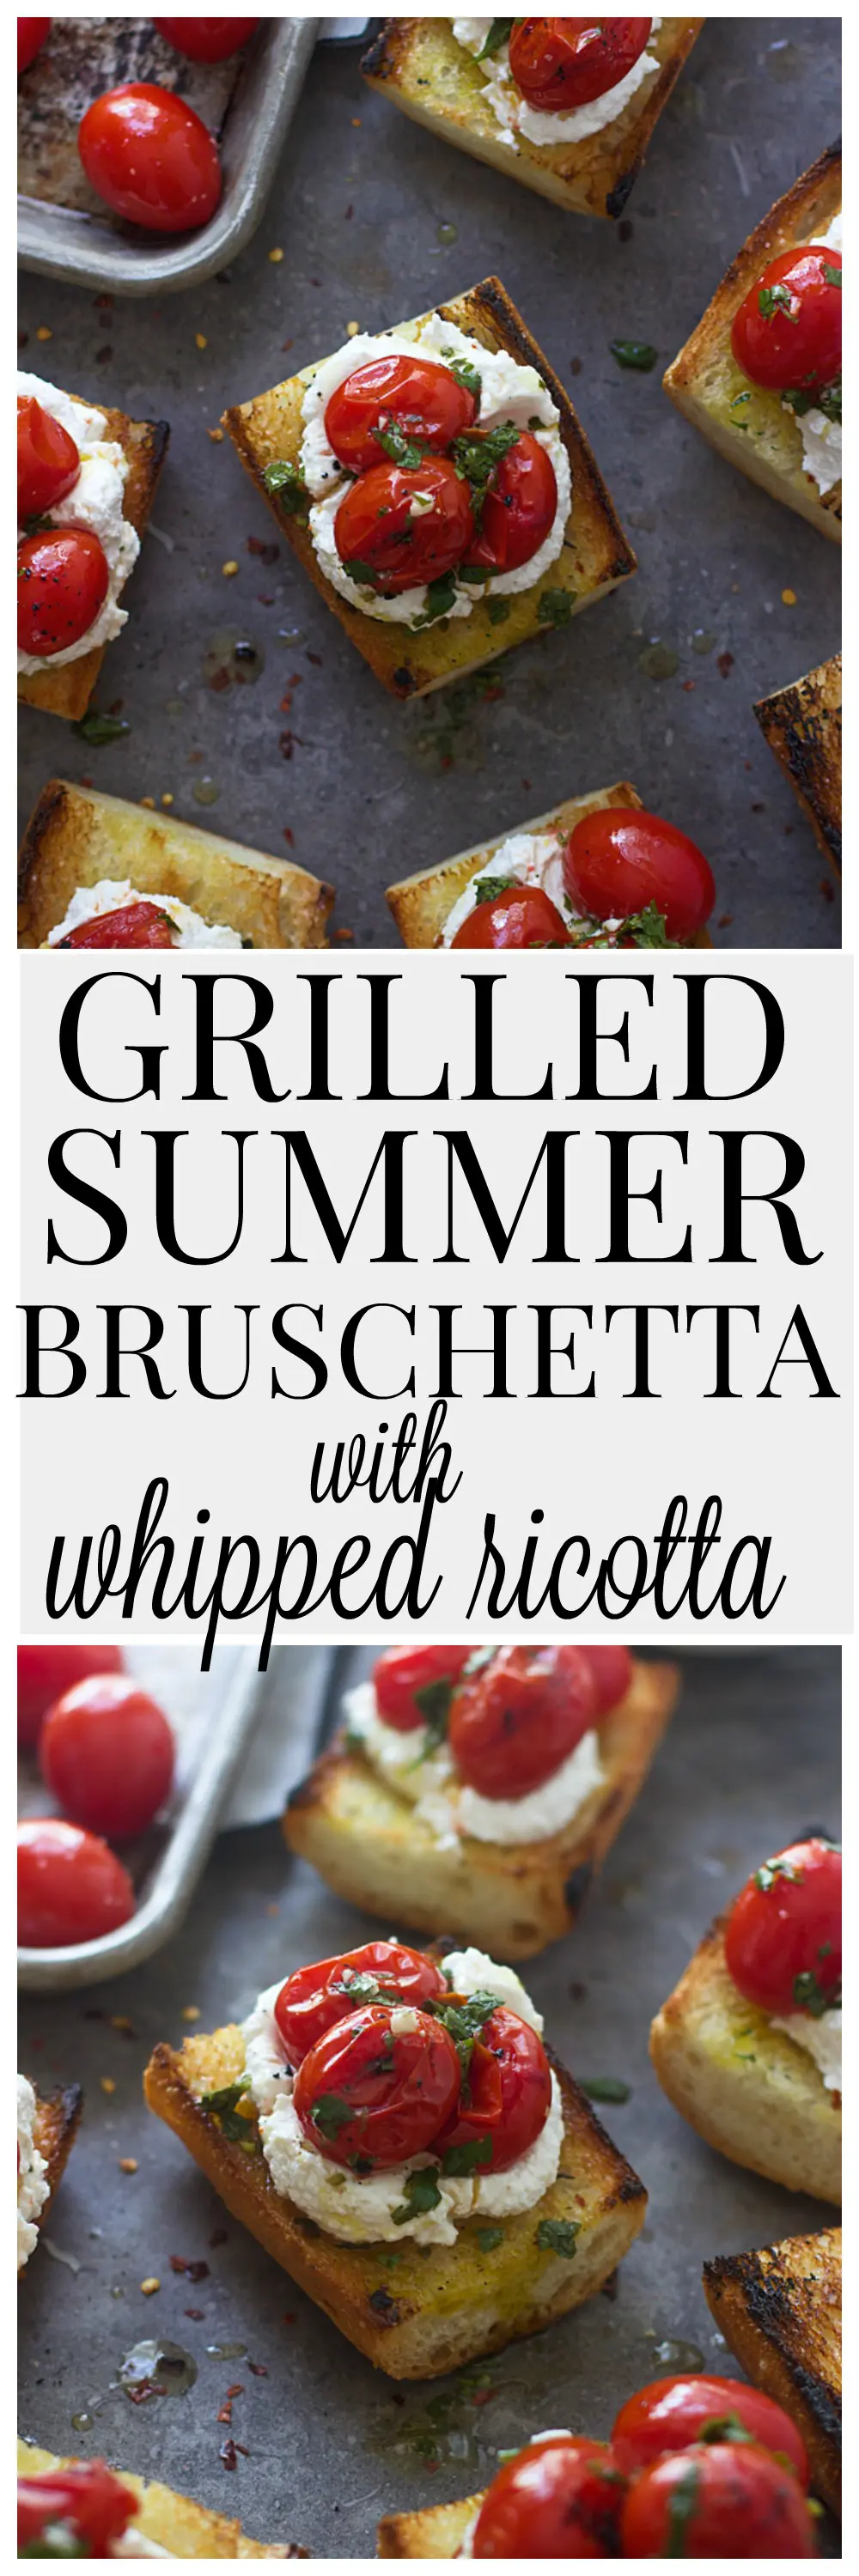 Grilled Summer Bruschetta with Whipped Ricotta